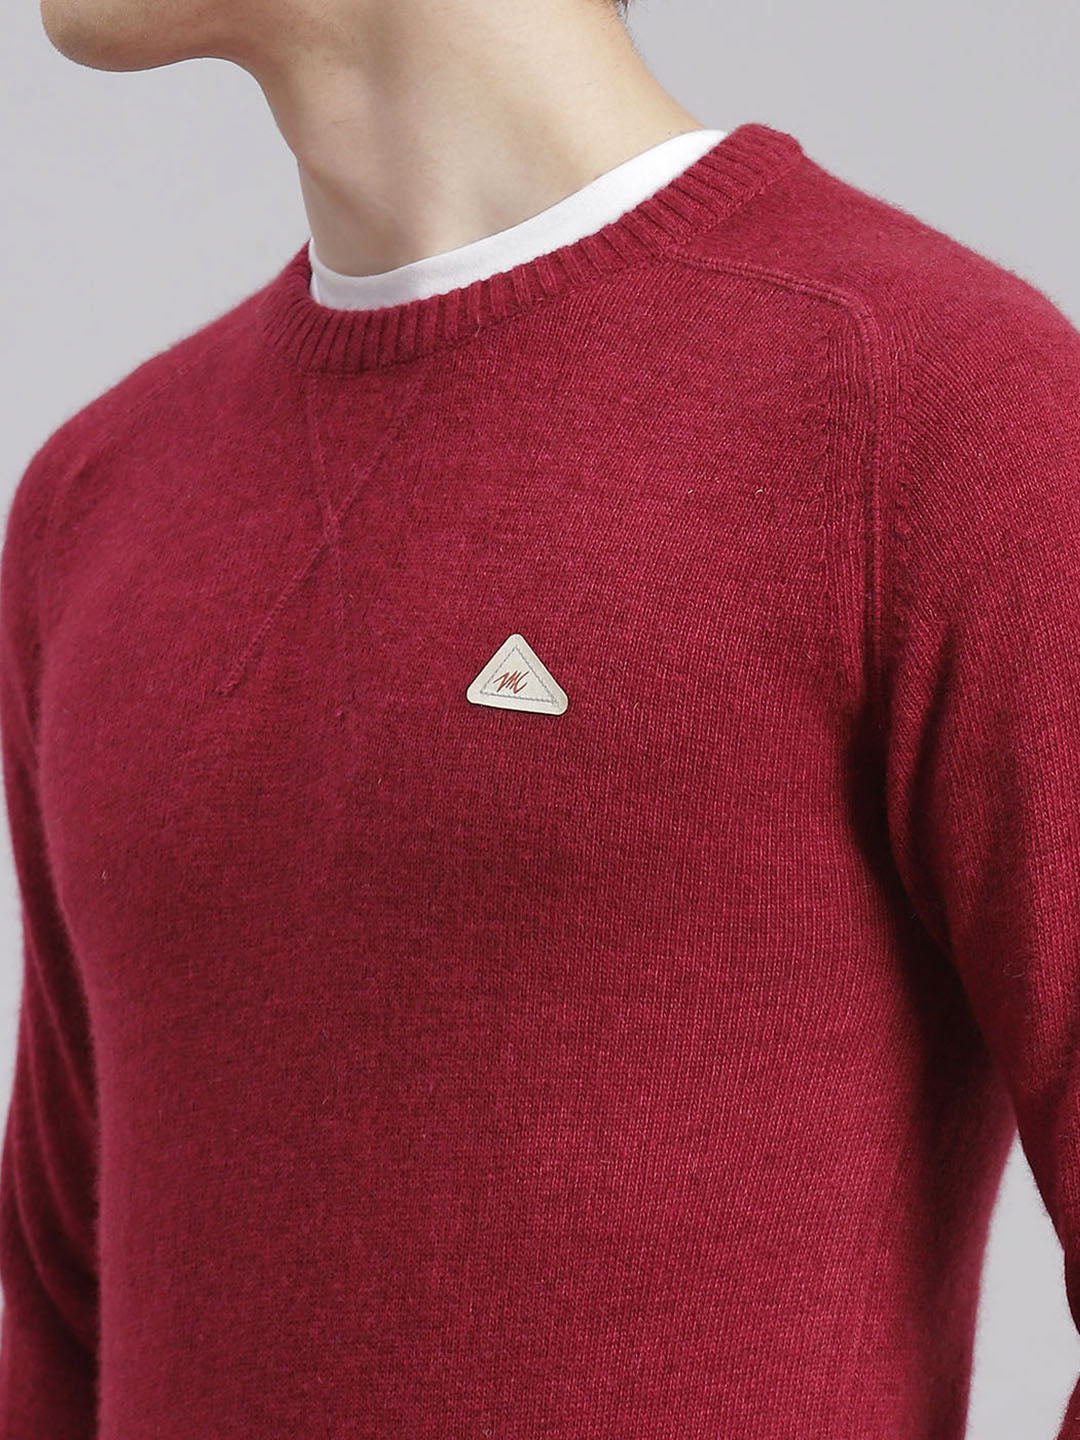 Men Maroon Solid Round Neck Full Sleeve Sweaters/Pullovers